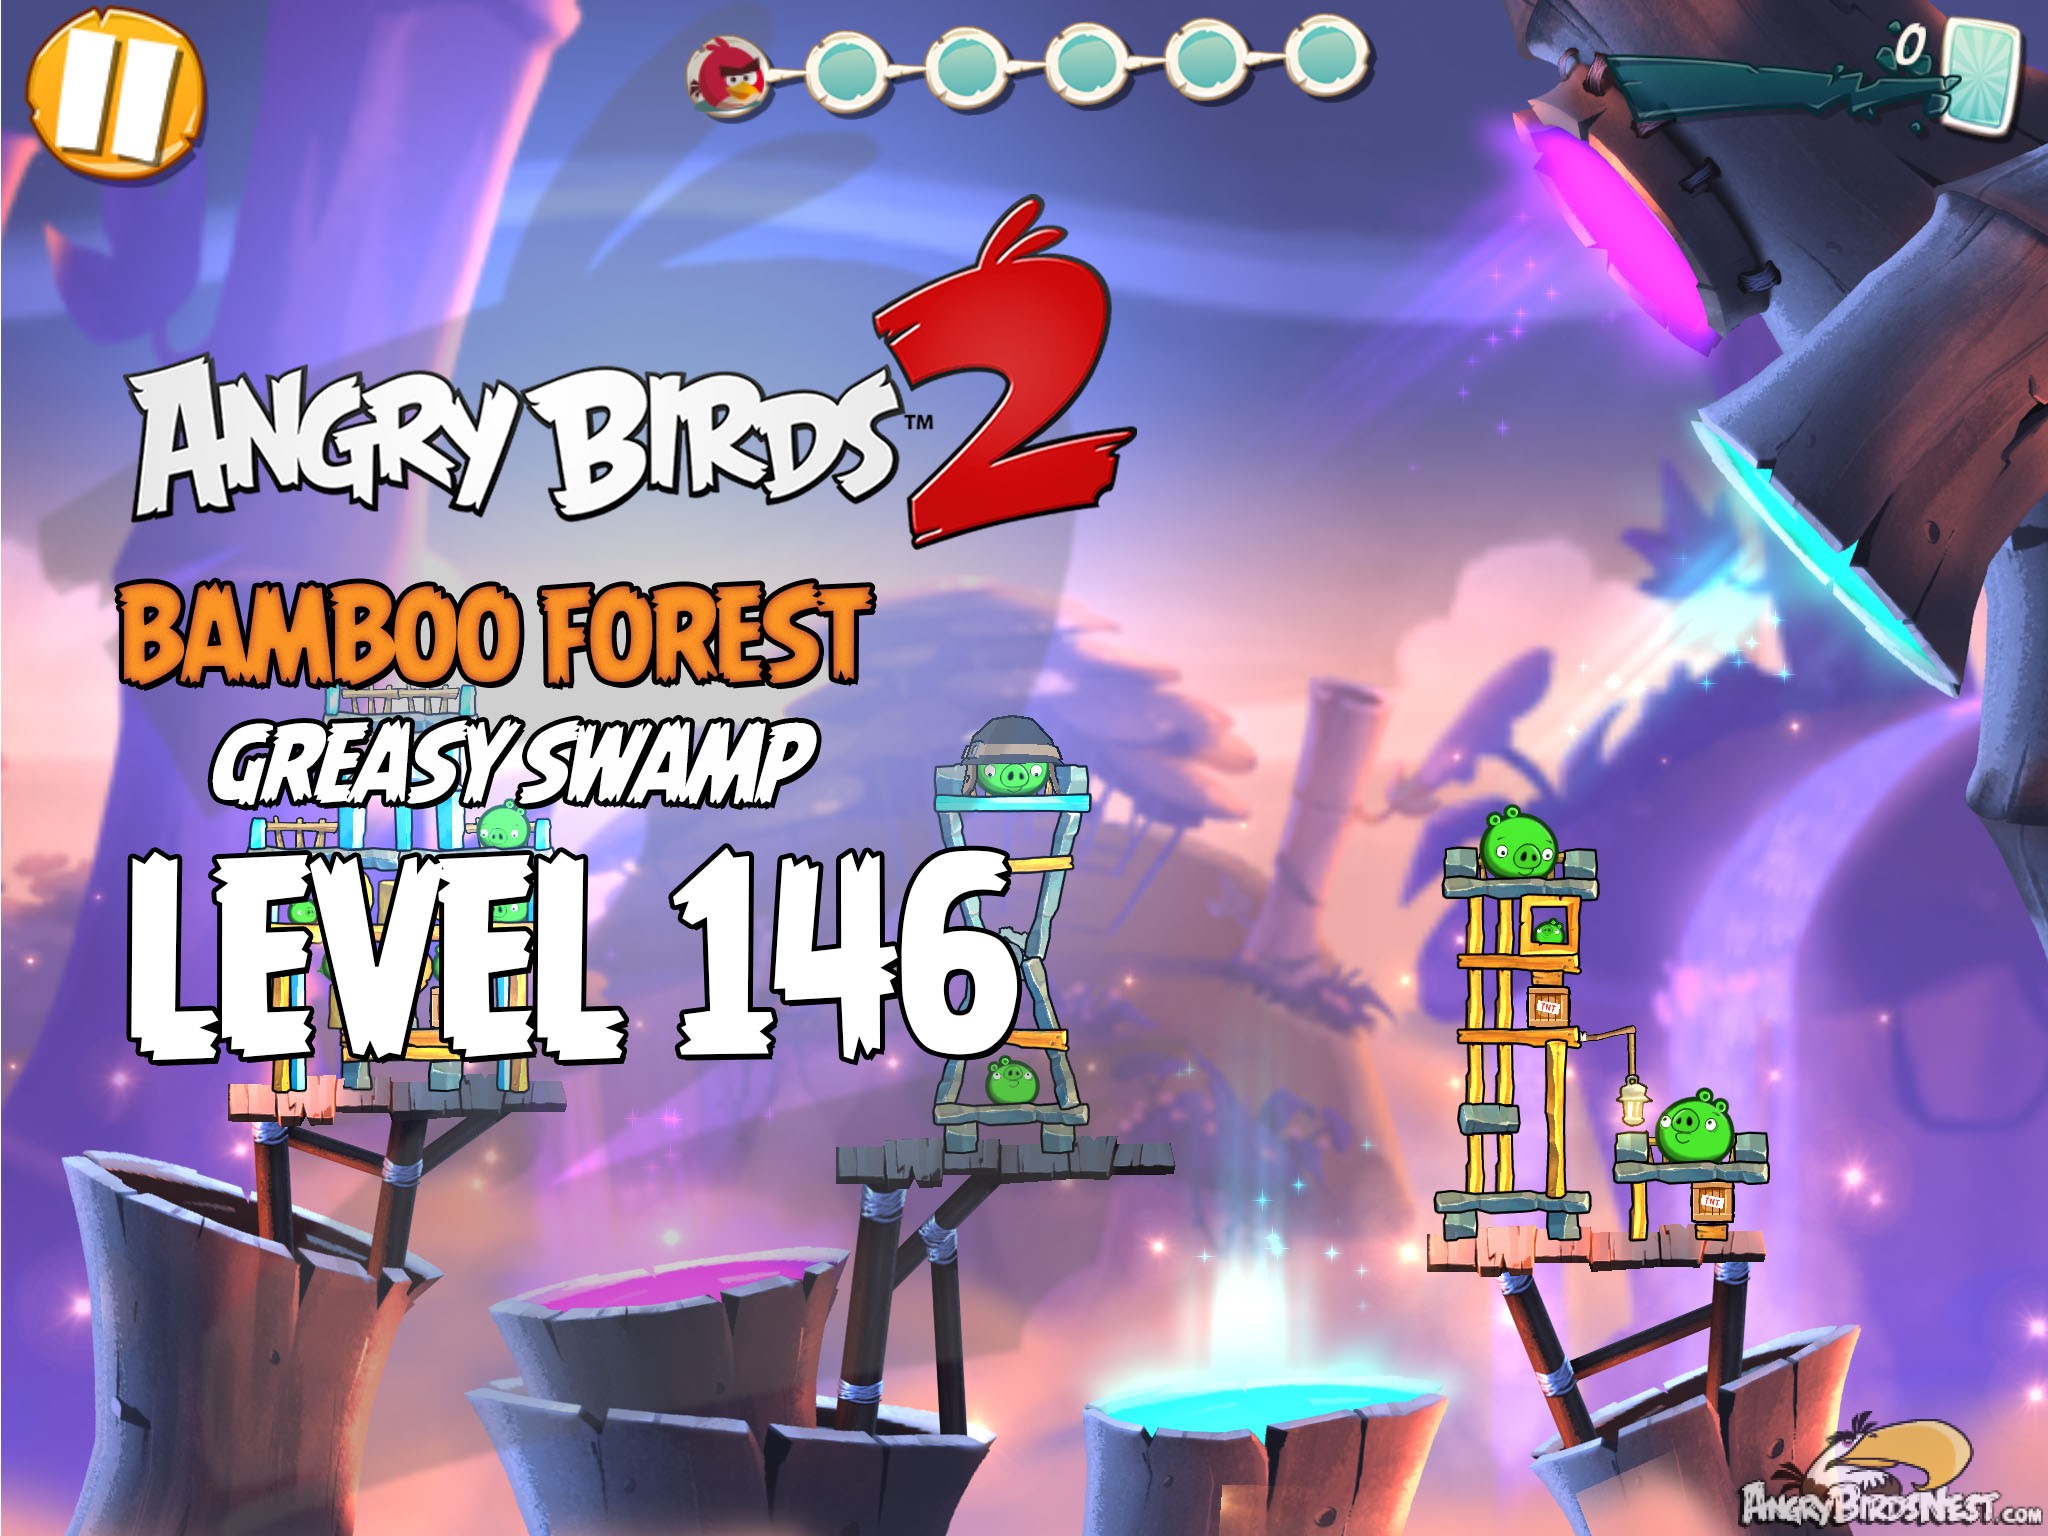 Angry Birds 2 Bamboo Forest Greasy Swamp Level 146